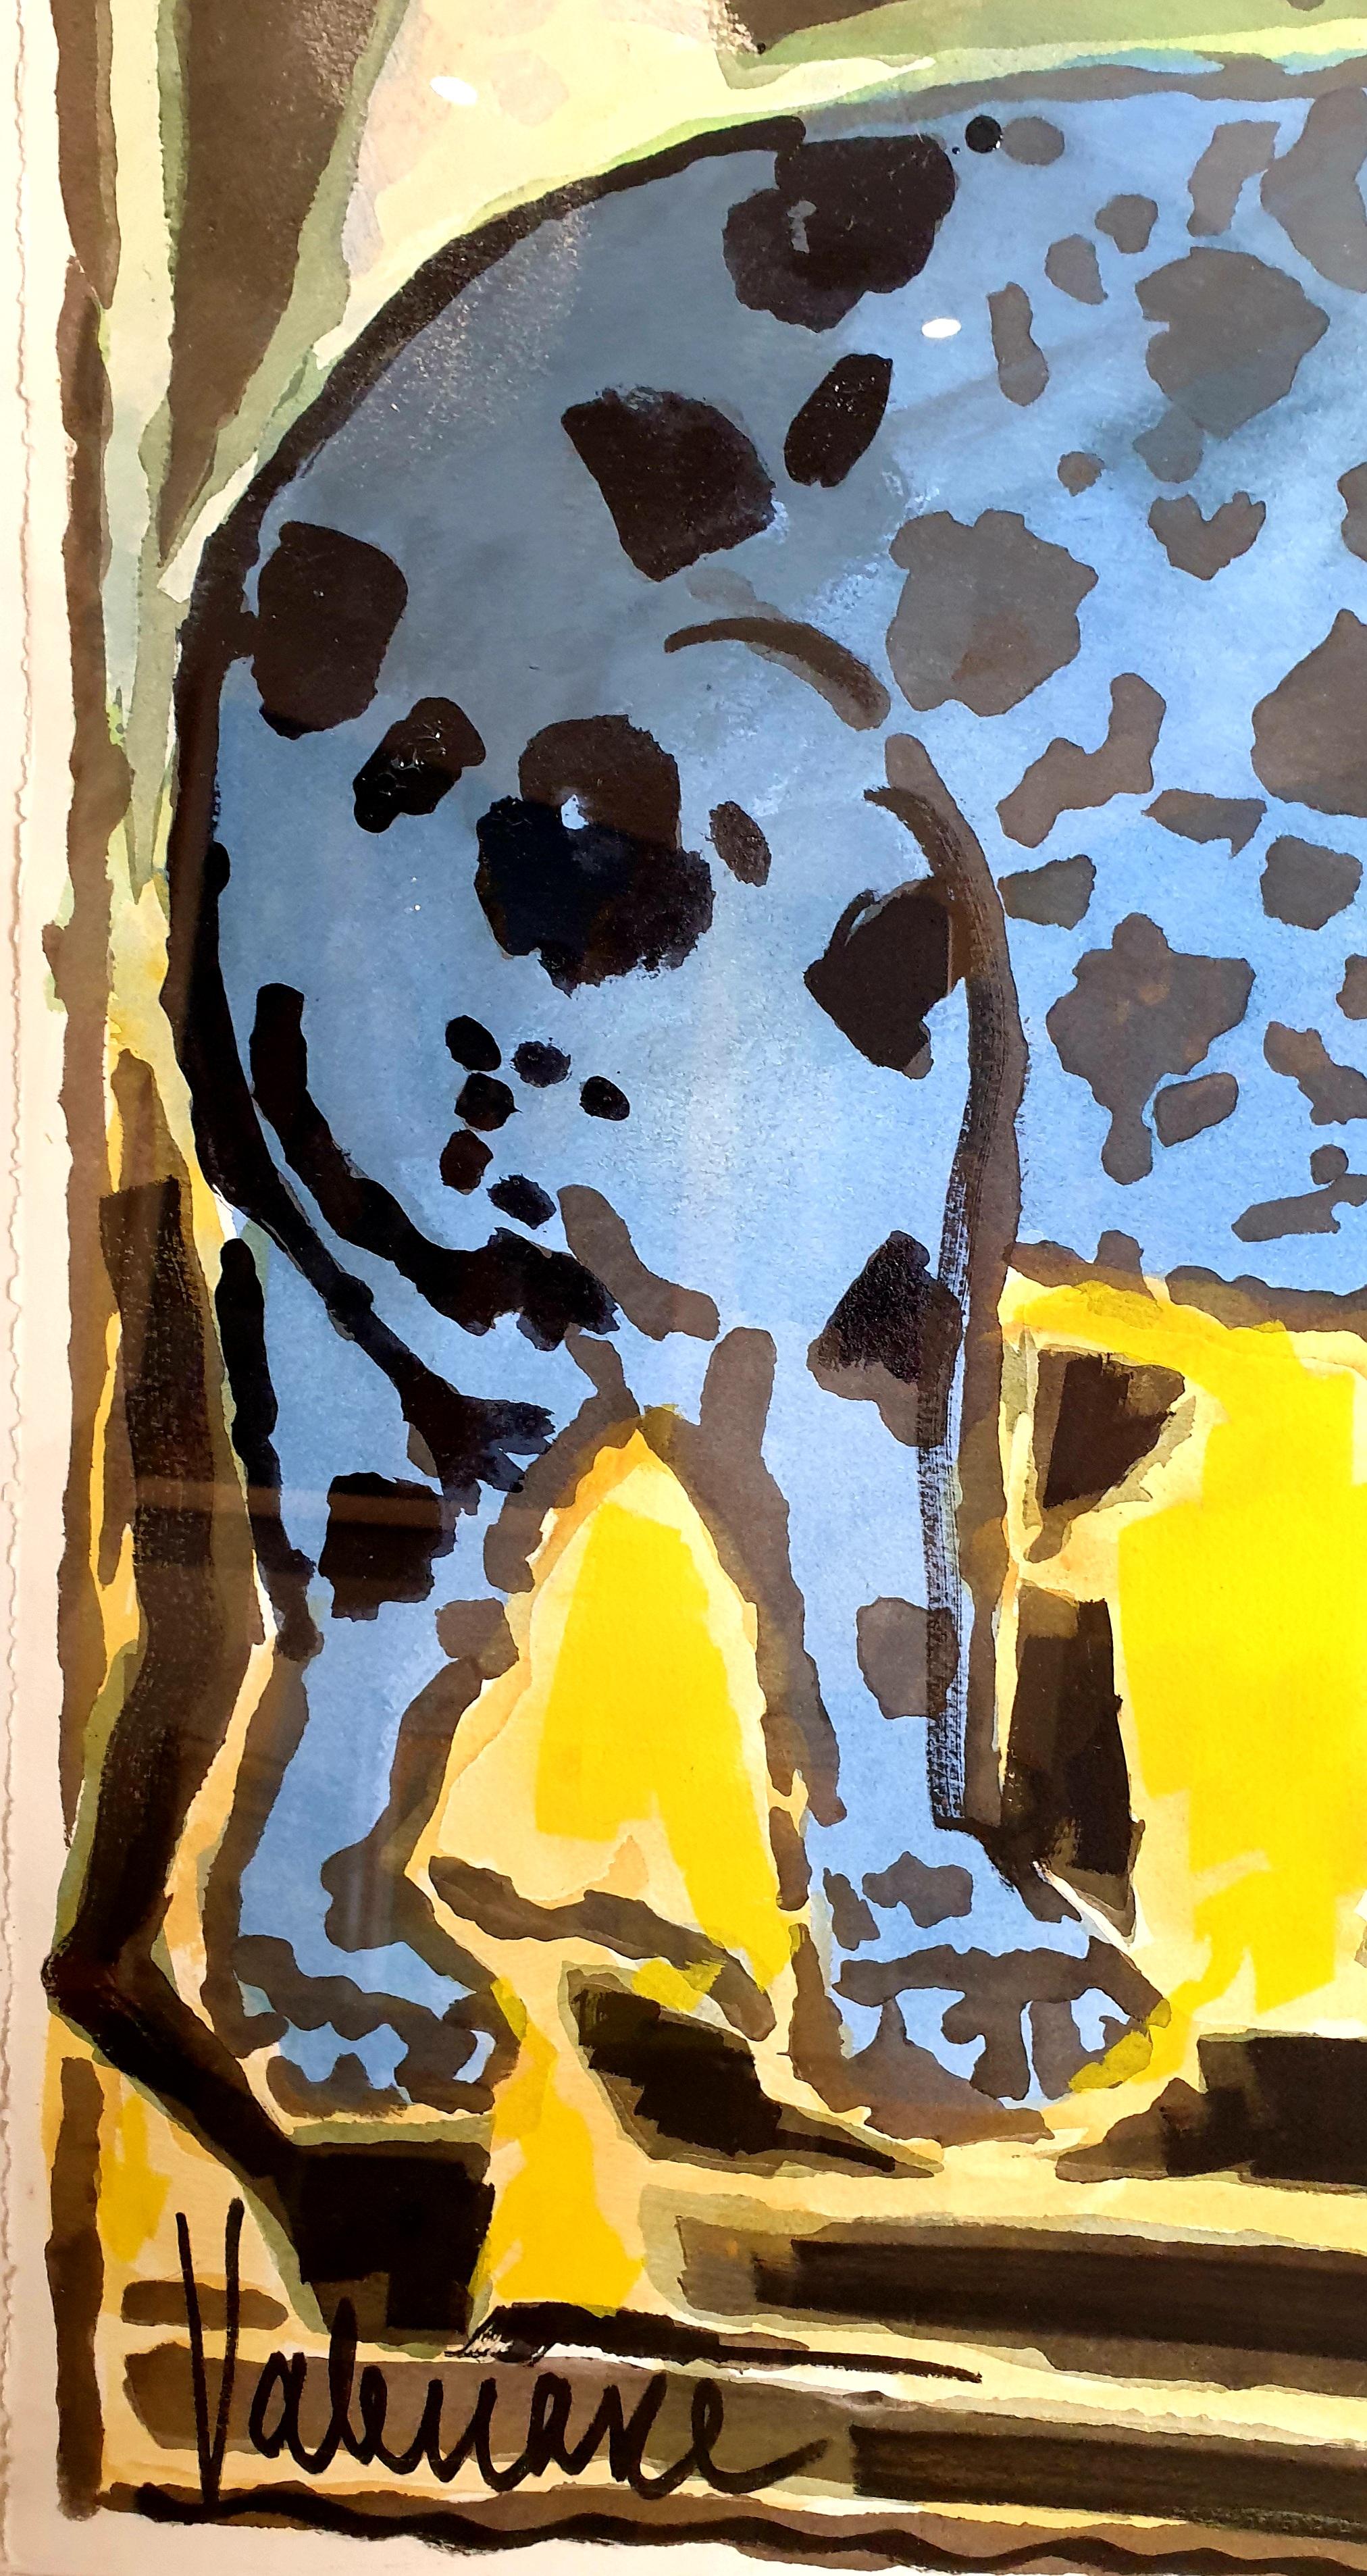 Mid-century gouache on handmade paper of a blue elephant in landscape by French artist Valeriane, signed to the bottom left and dated to the bottom right above a star of David.

A charming rendition of a blue elephant in wonderfully rich and playful